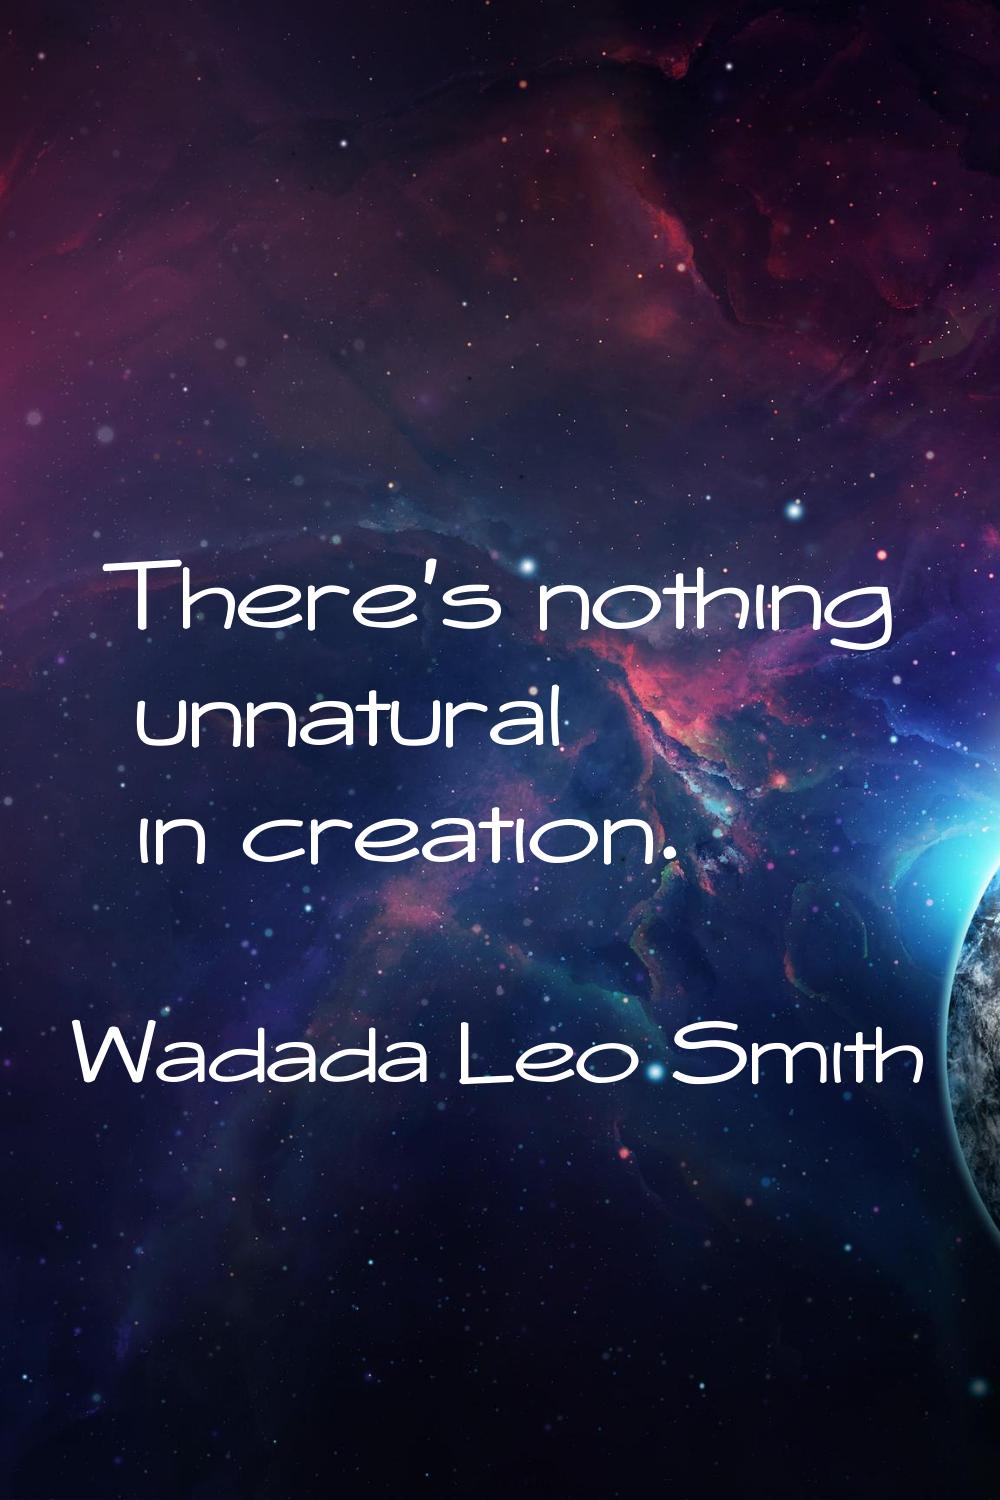 There's nothing unnatural in creation.